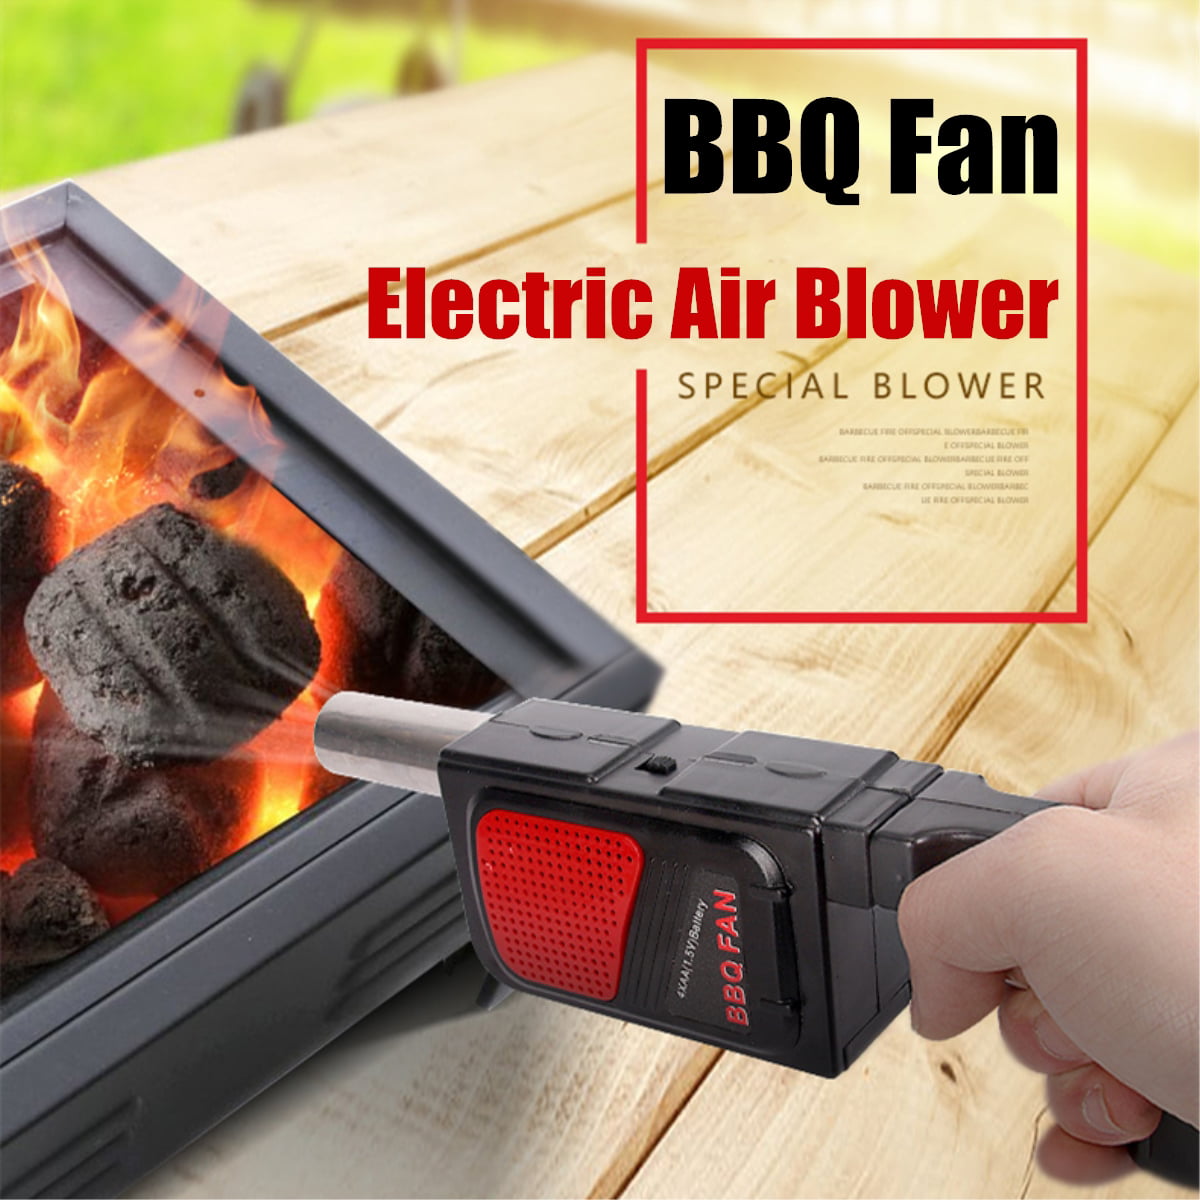 Electric Cooking BBQ Fan Air Blower For Barbecue Fire Bellows Camping Picnic USA 